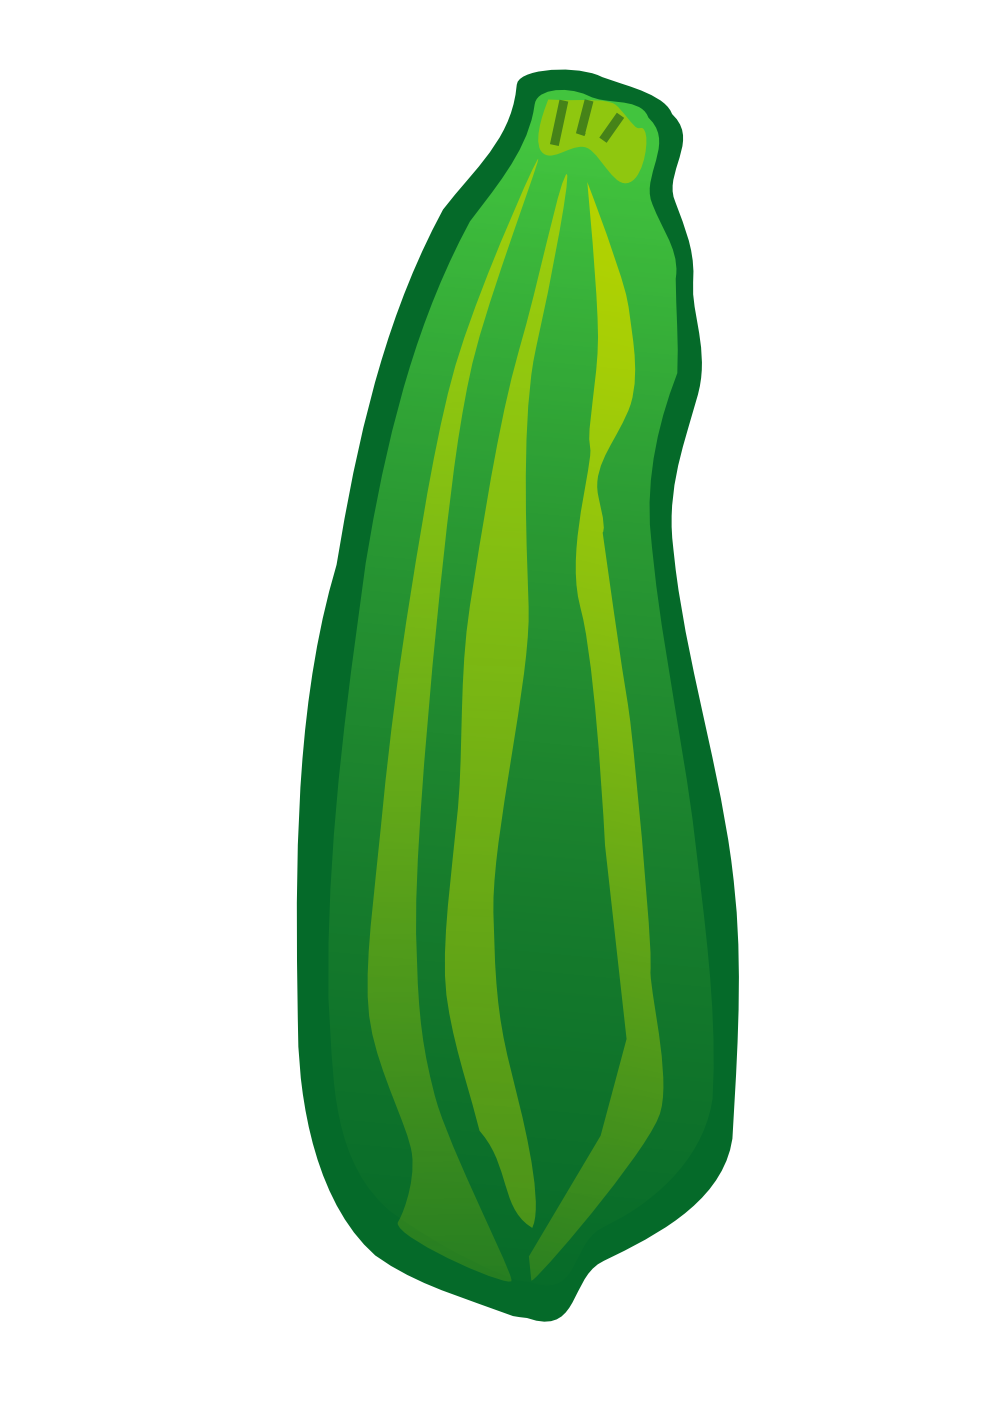 Pickle clipart animated, Pickle animated Transparent FREE.